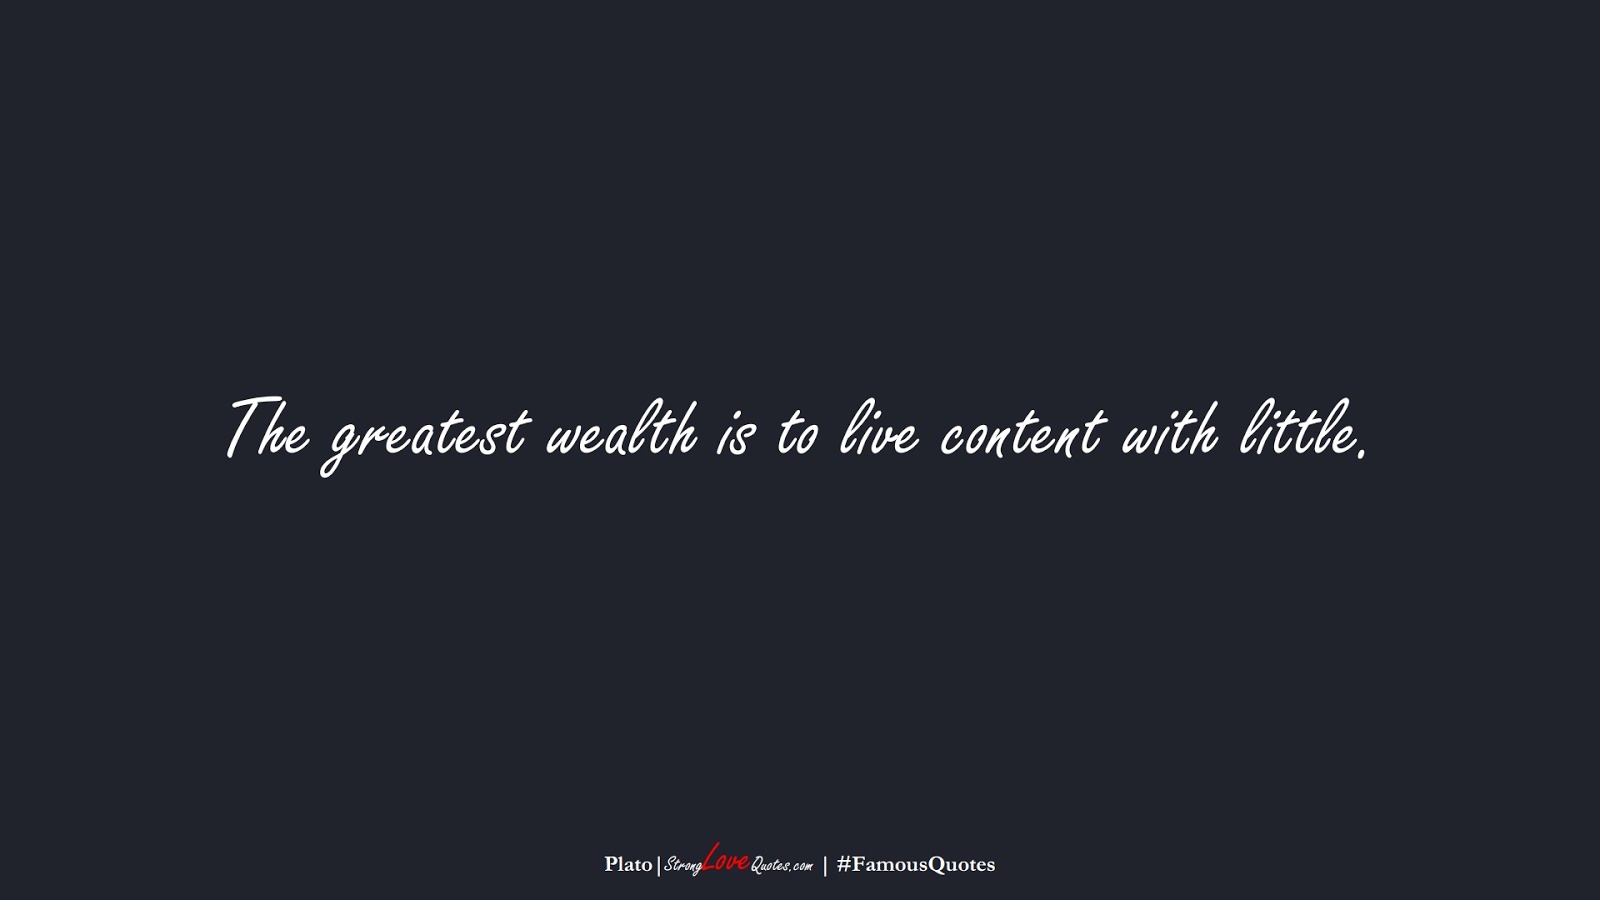 The greatest wealth is to live content with little. (Plato);  #FamousQuotes